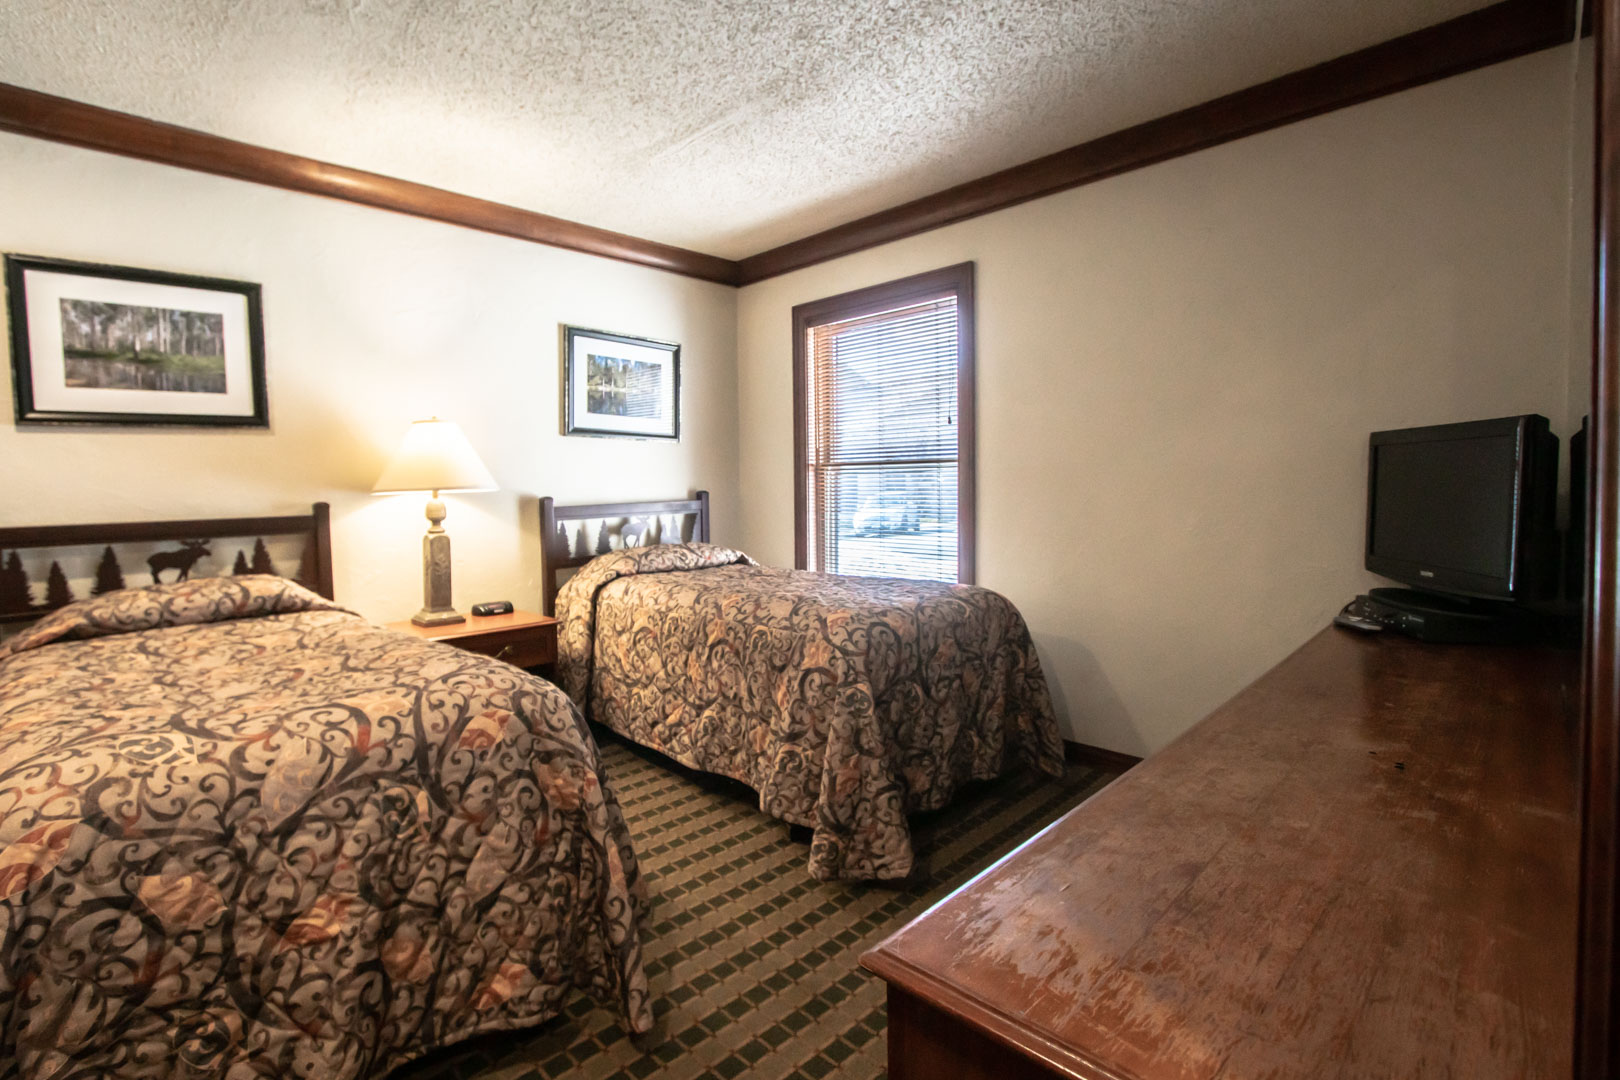 A room with double beds at VRI's Sunburst Resort in Steamboat Springs, CO.